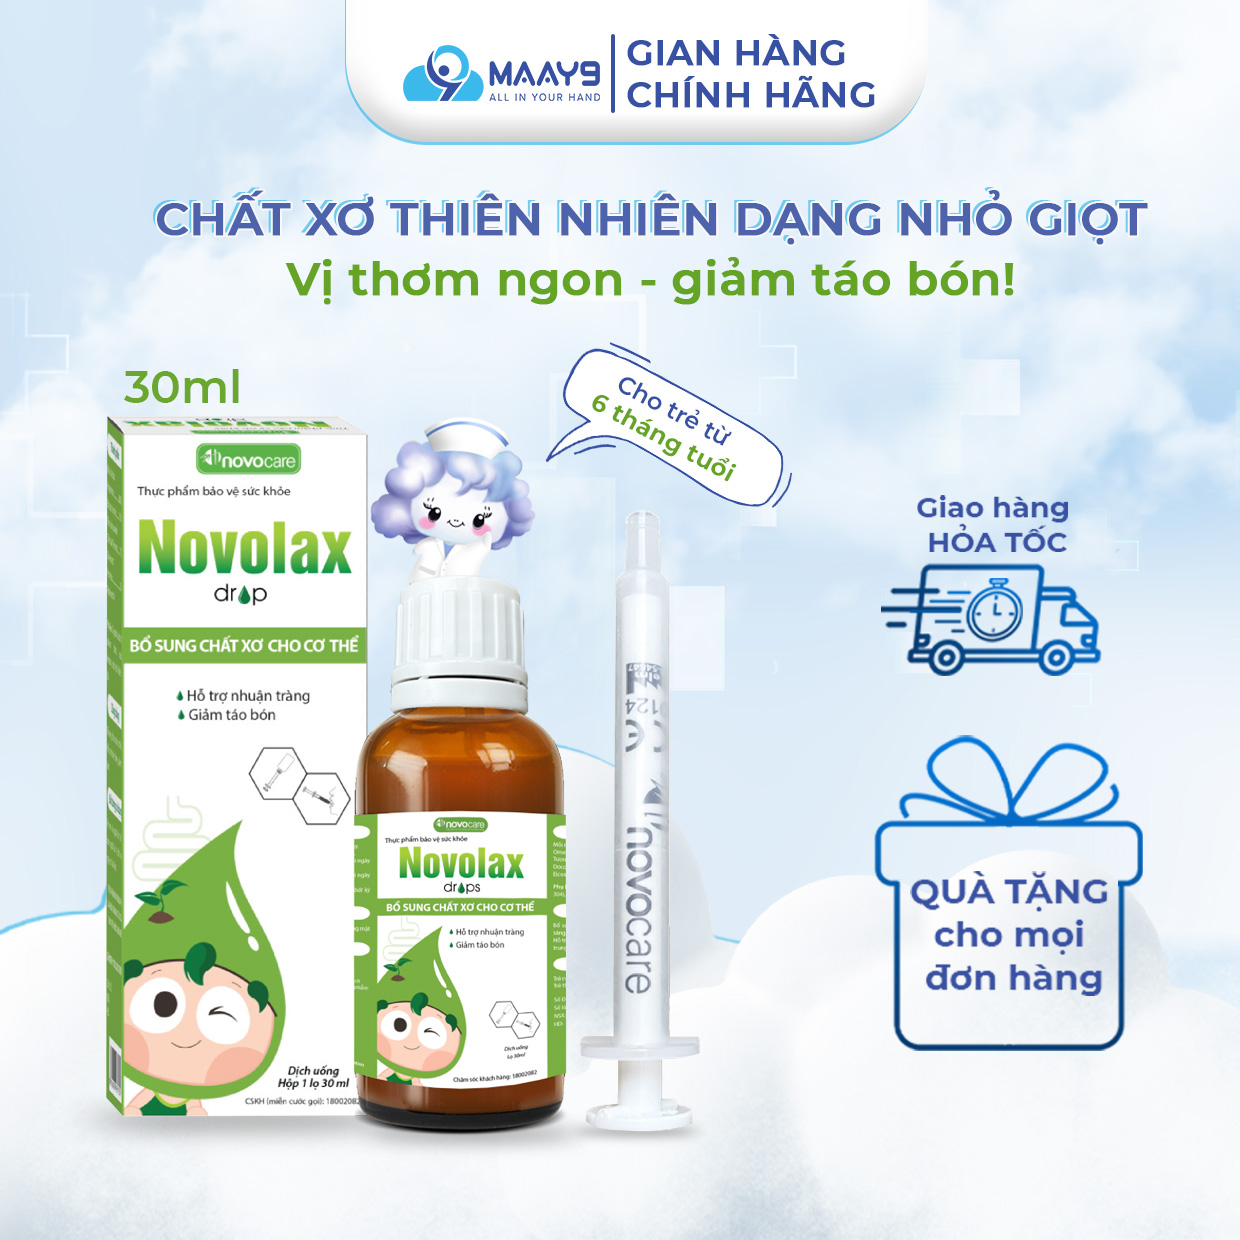 soluble fiber Novocare Novolax drop for babies to reduce constipation